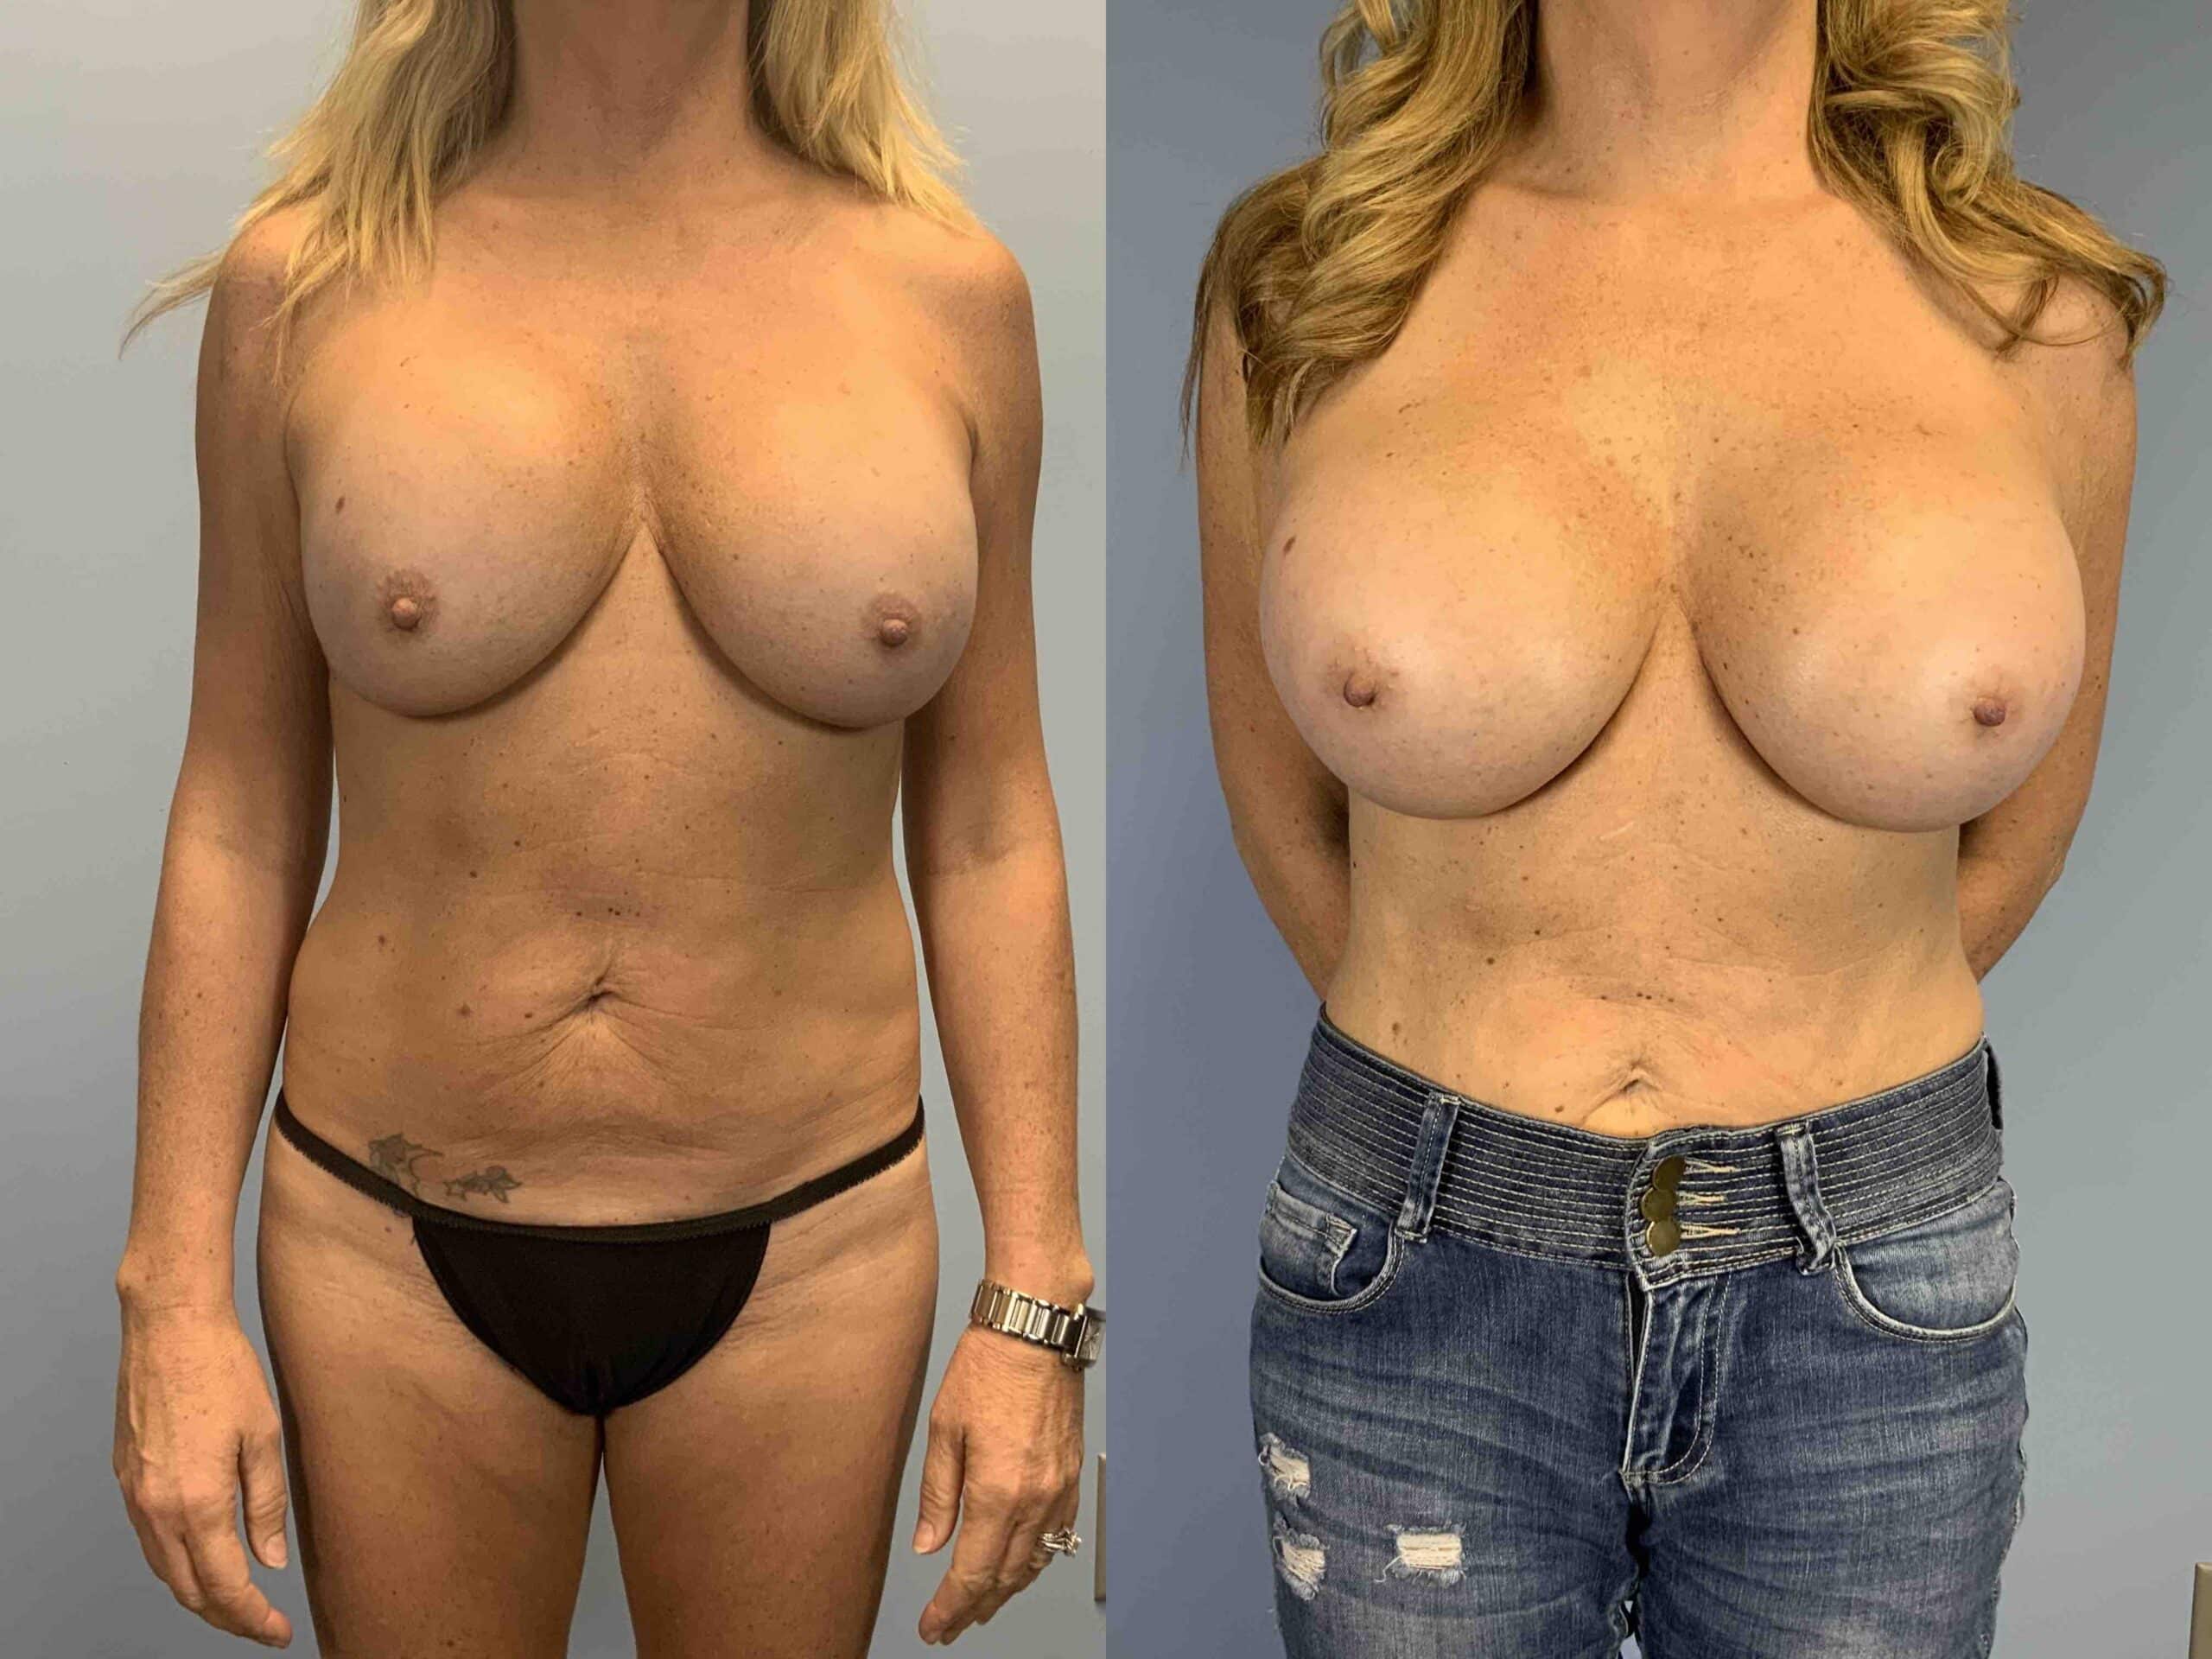 Before and after, patient 2 mo post op from Explant Breast Implant 325 cc, Capsulectomy, Breast Re-Augmentation, Strattice Reinforcement, Level III Muscle Release procedures performed by Dr. Paul Vanek